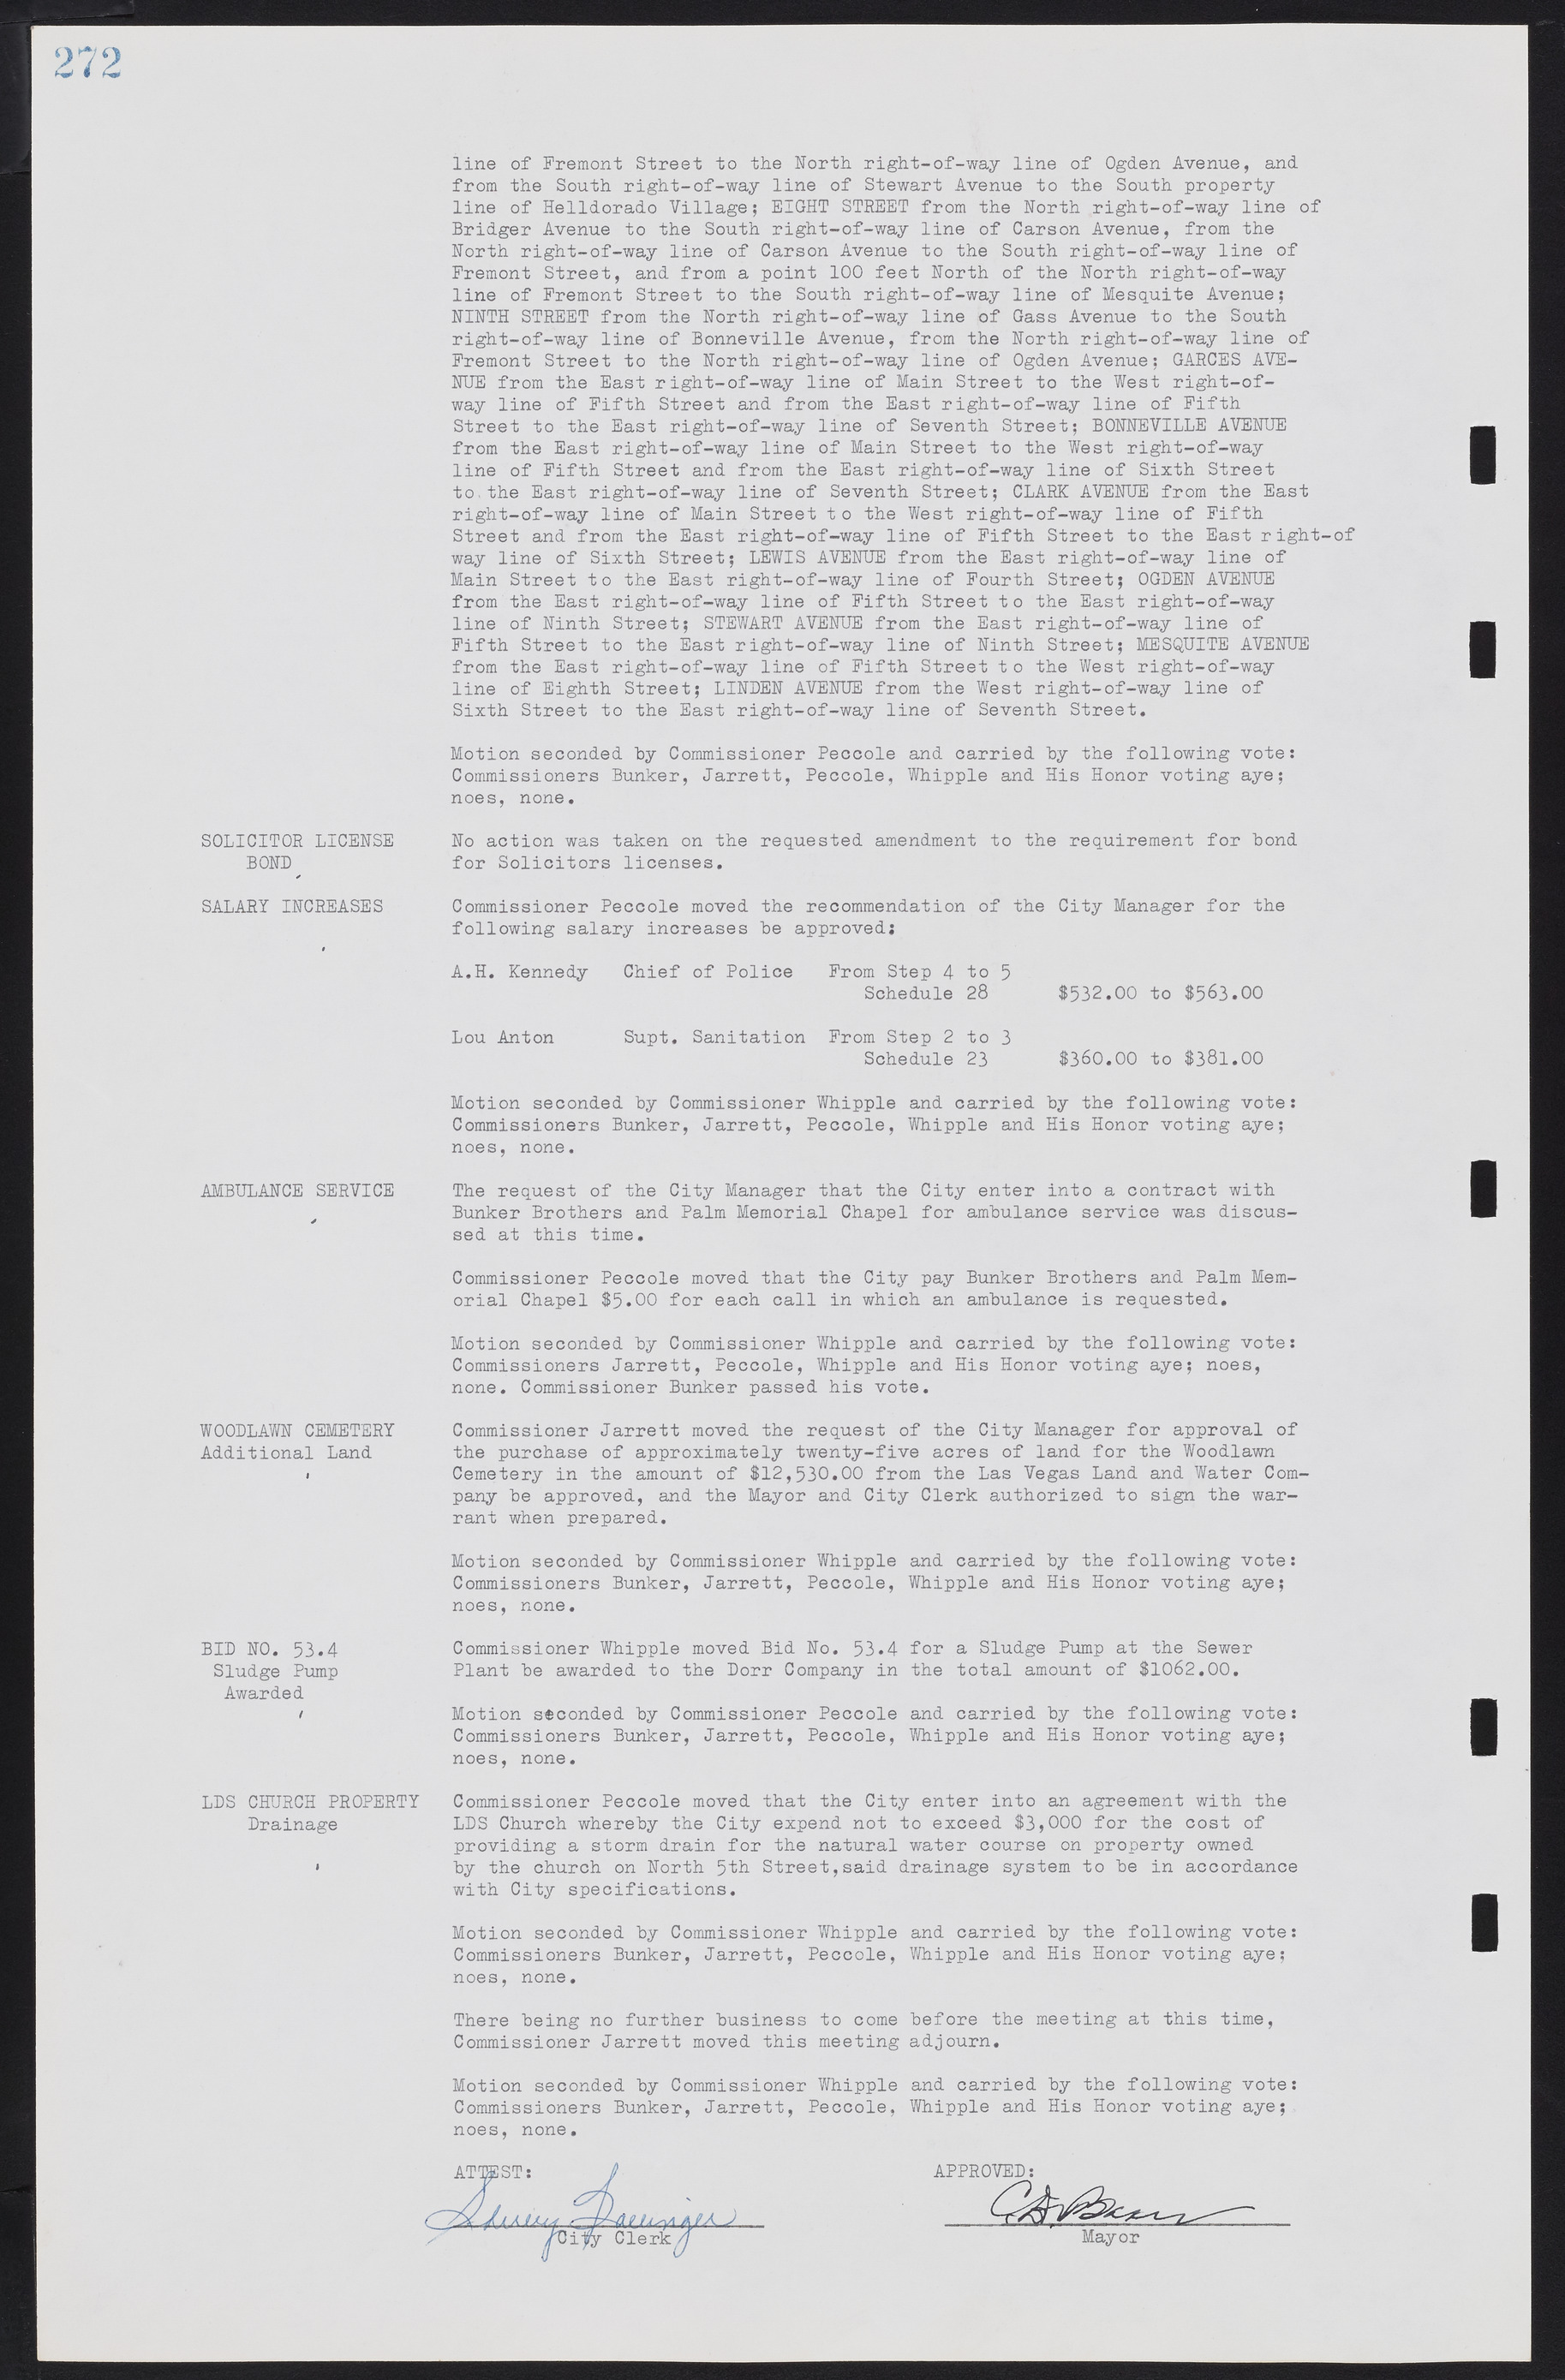 Las Vegas City Commission Minutes, May 26, 1952 to February 17, 1954, lvc000008-288